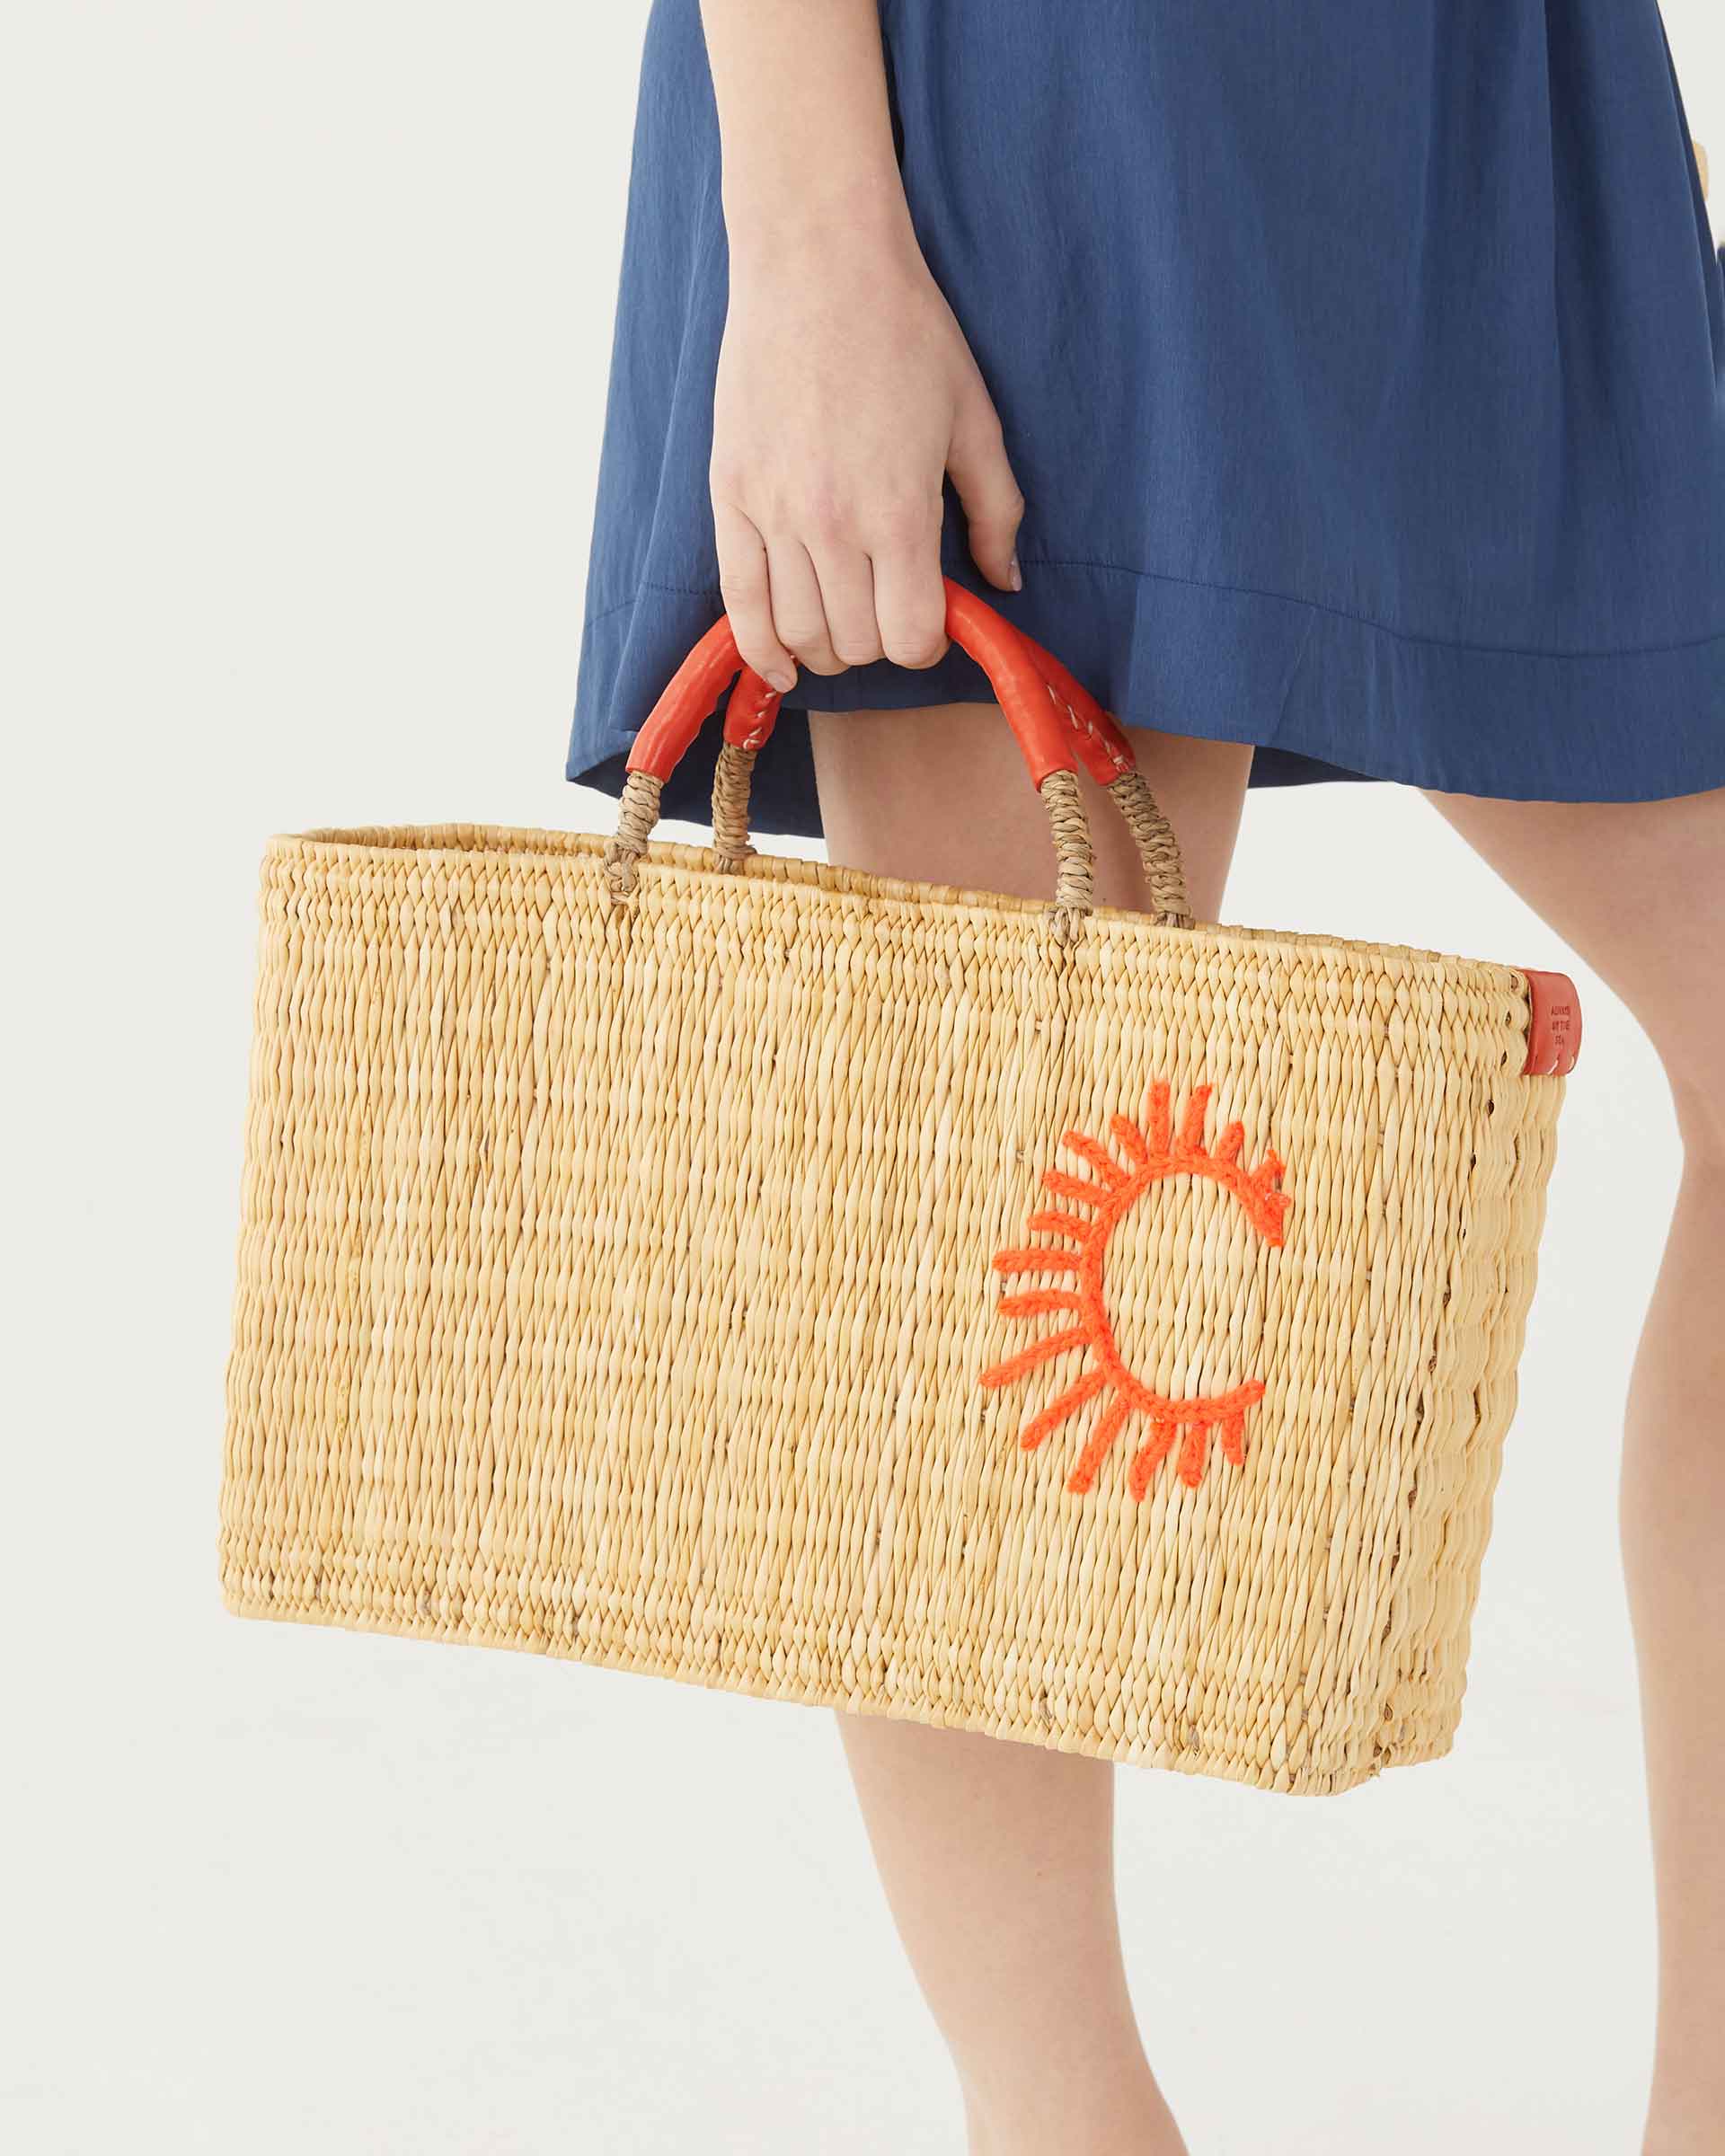 female holding straw bag with orange leather handles and a sun on a white background